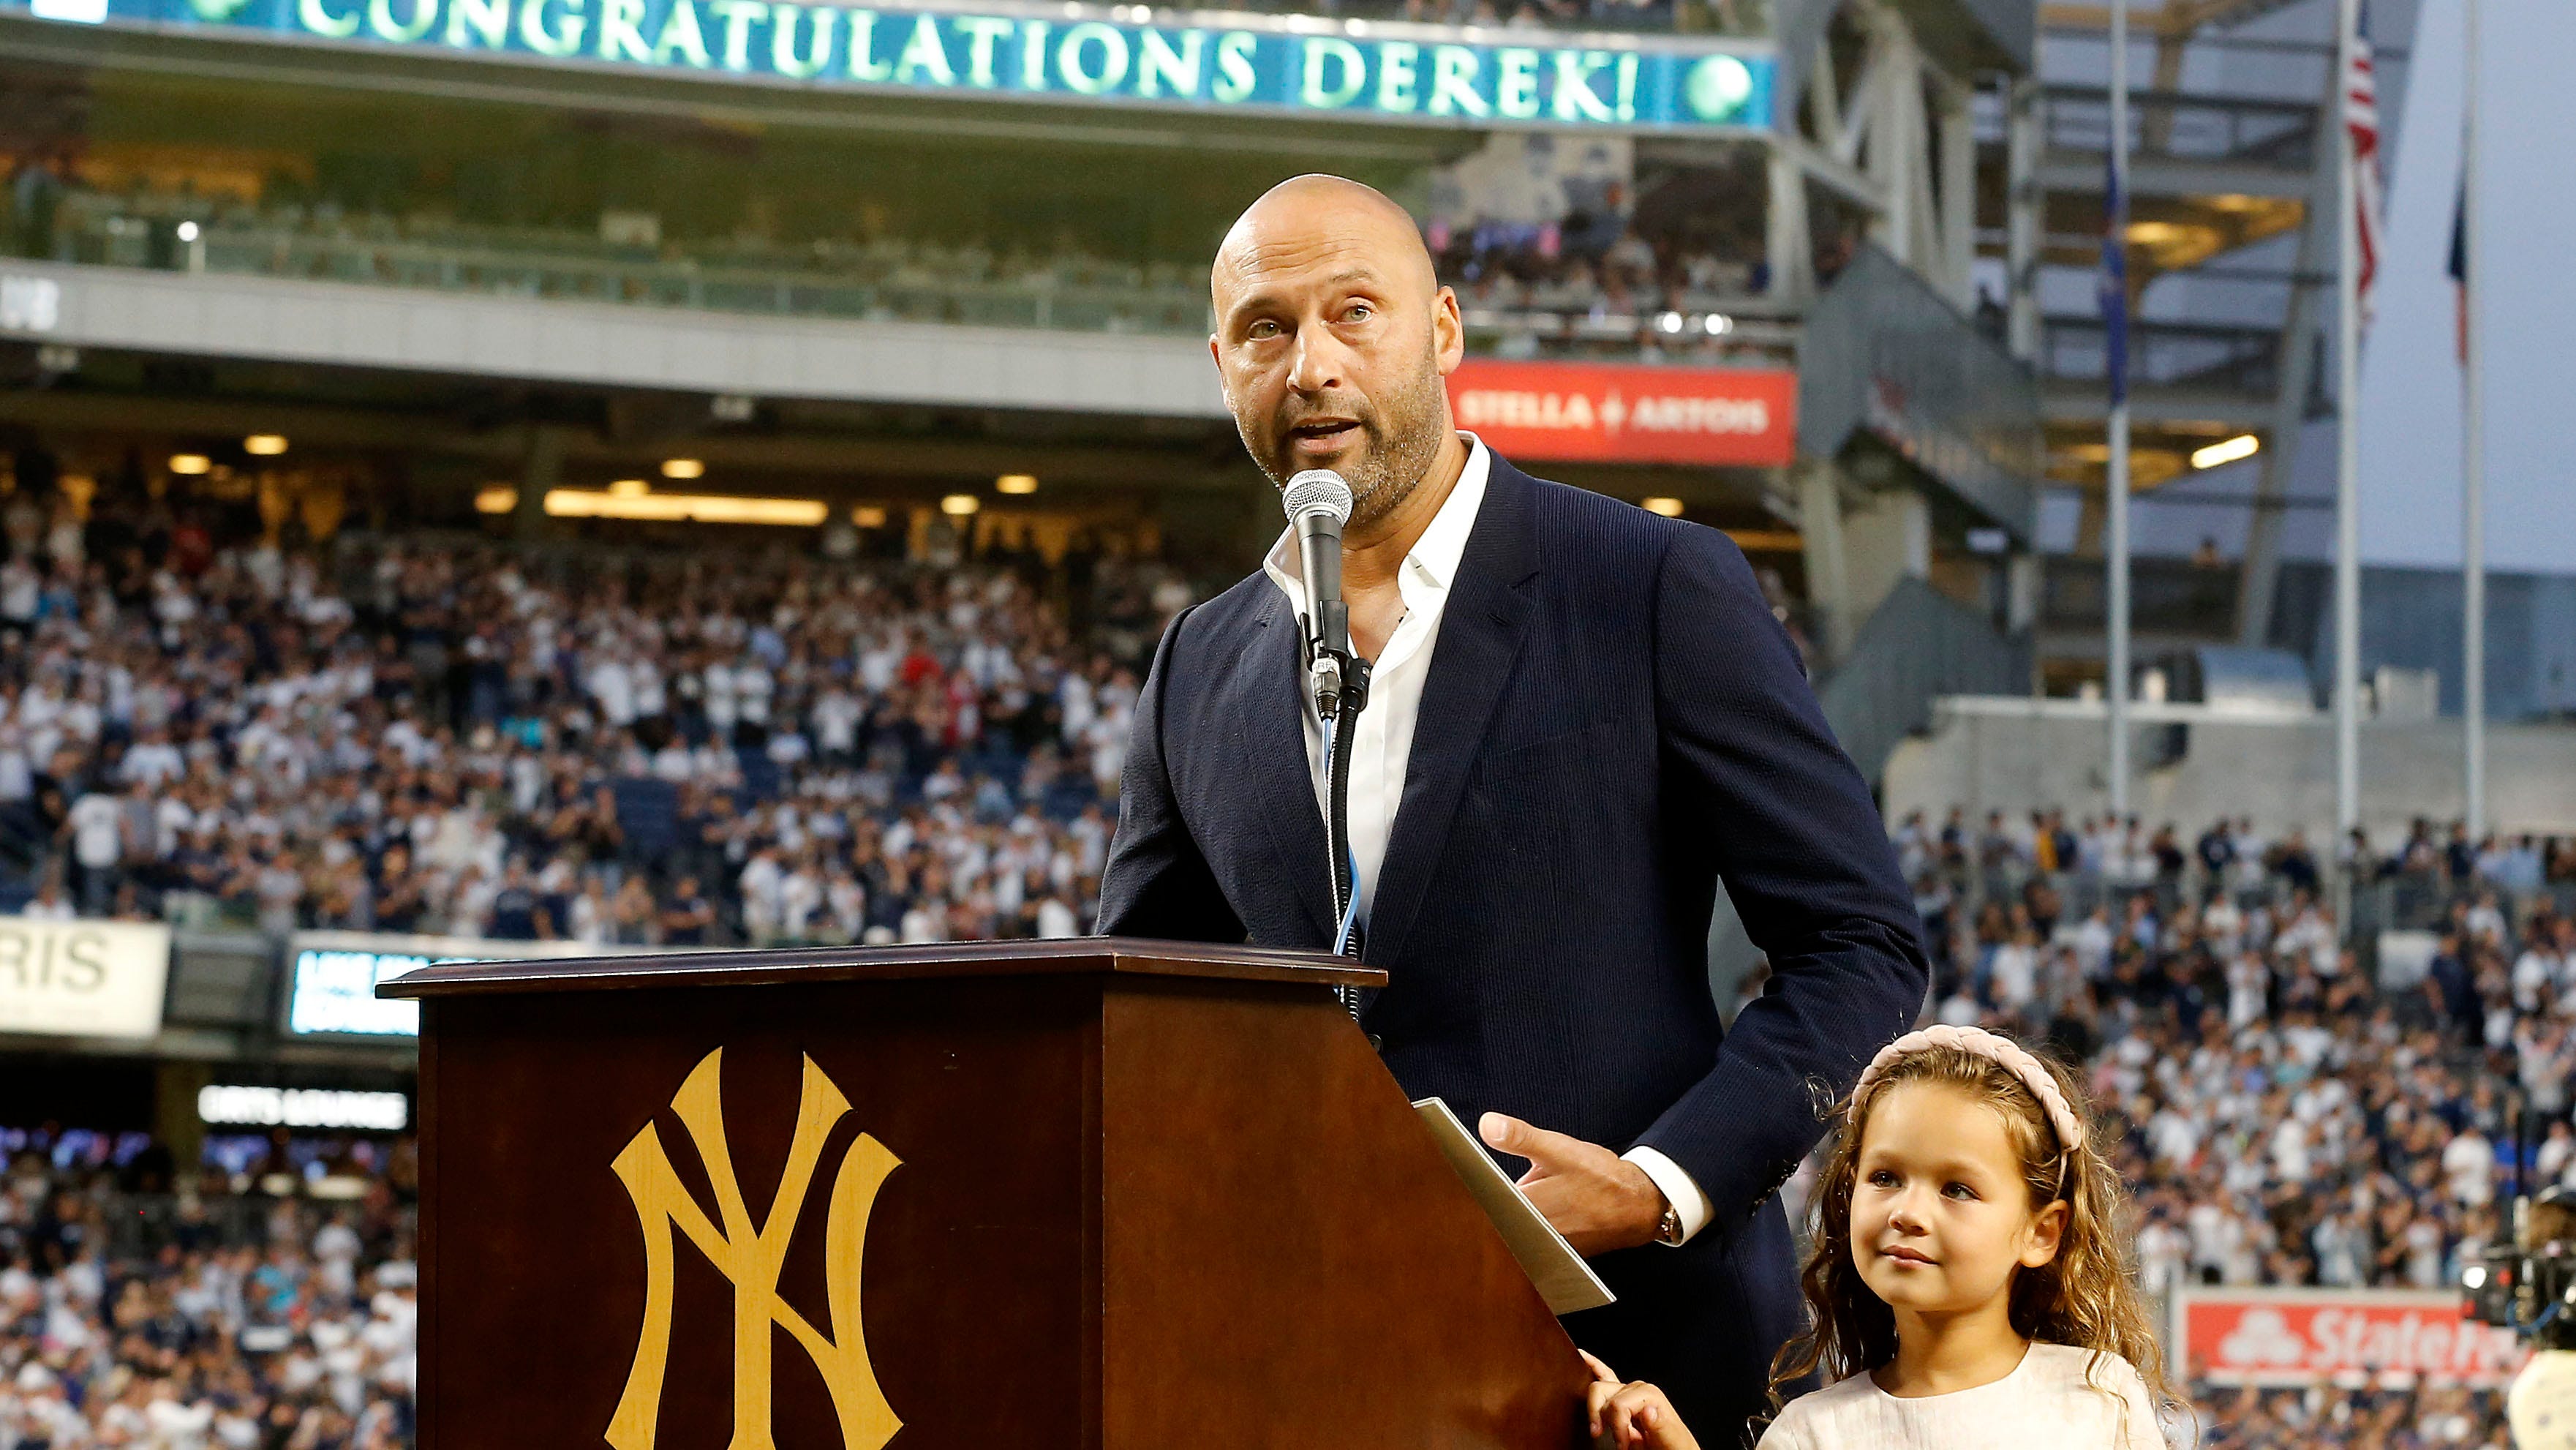 Derek Jeter showered with cheers during Yankees’ Hall of Fame tribute: ‘It feels good to be back’